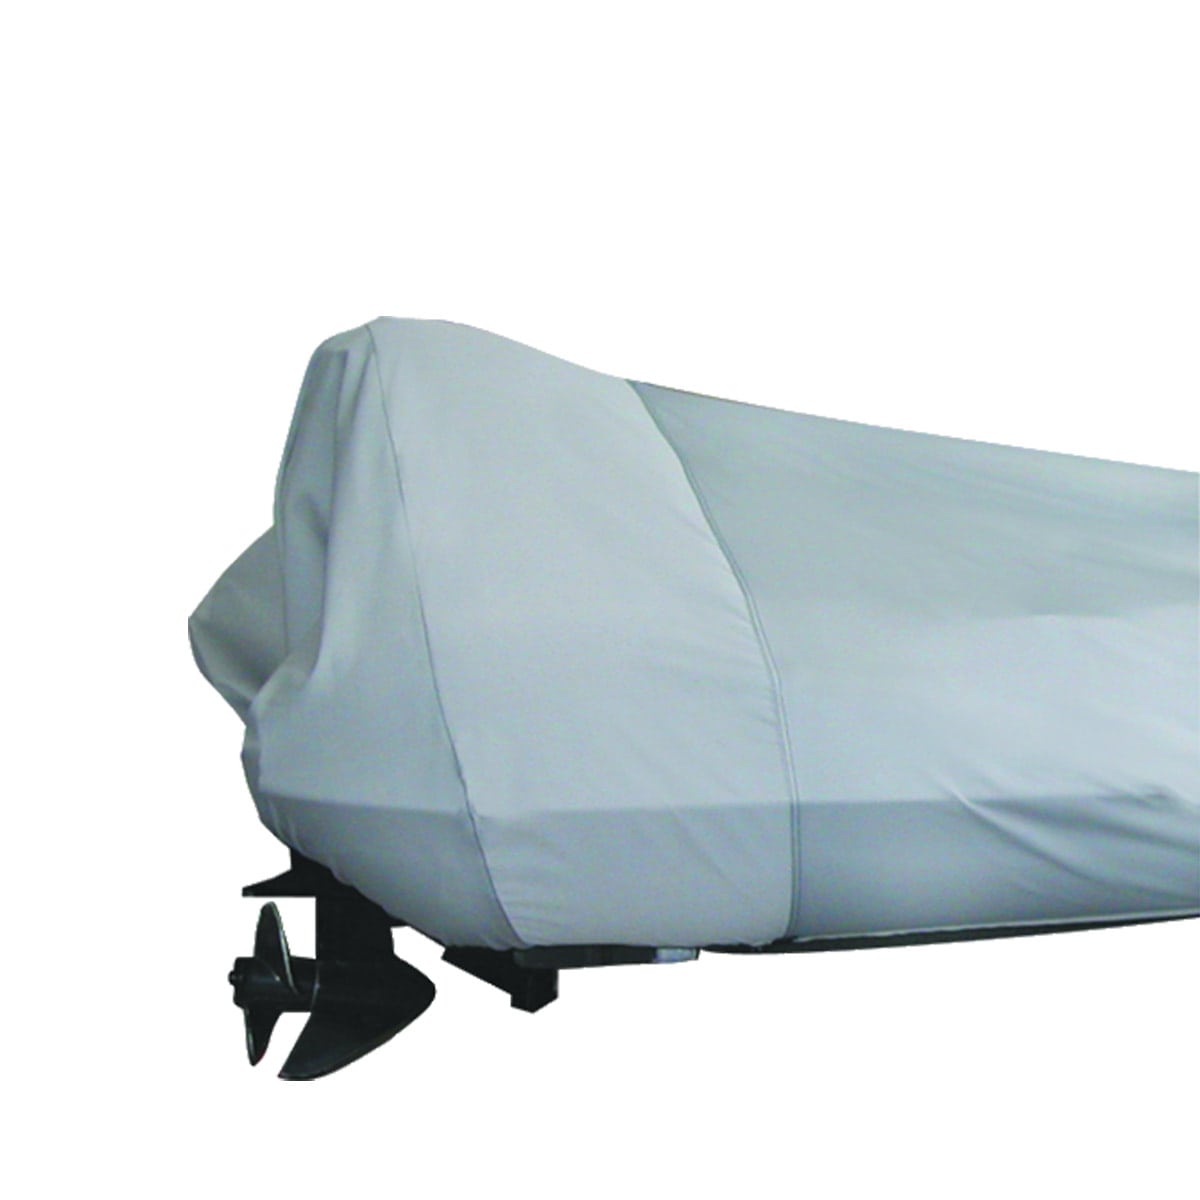 Heavy Duty Inflatable Boat Dinghy Cover b